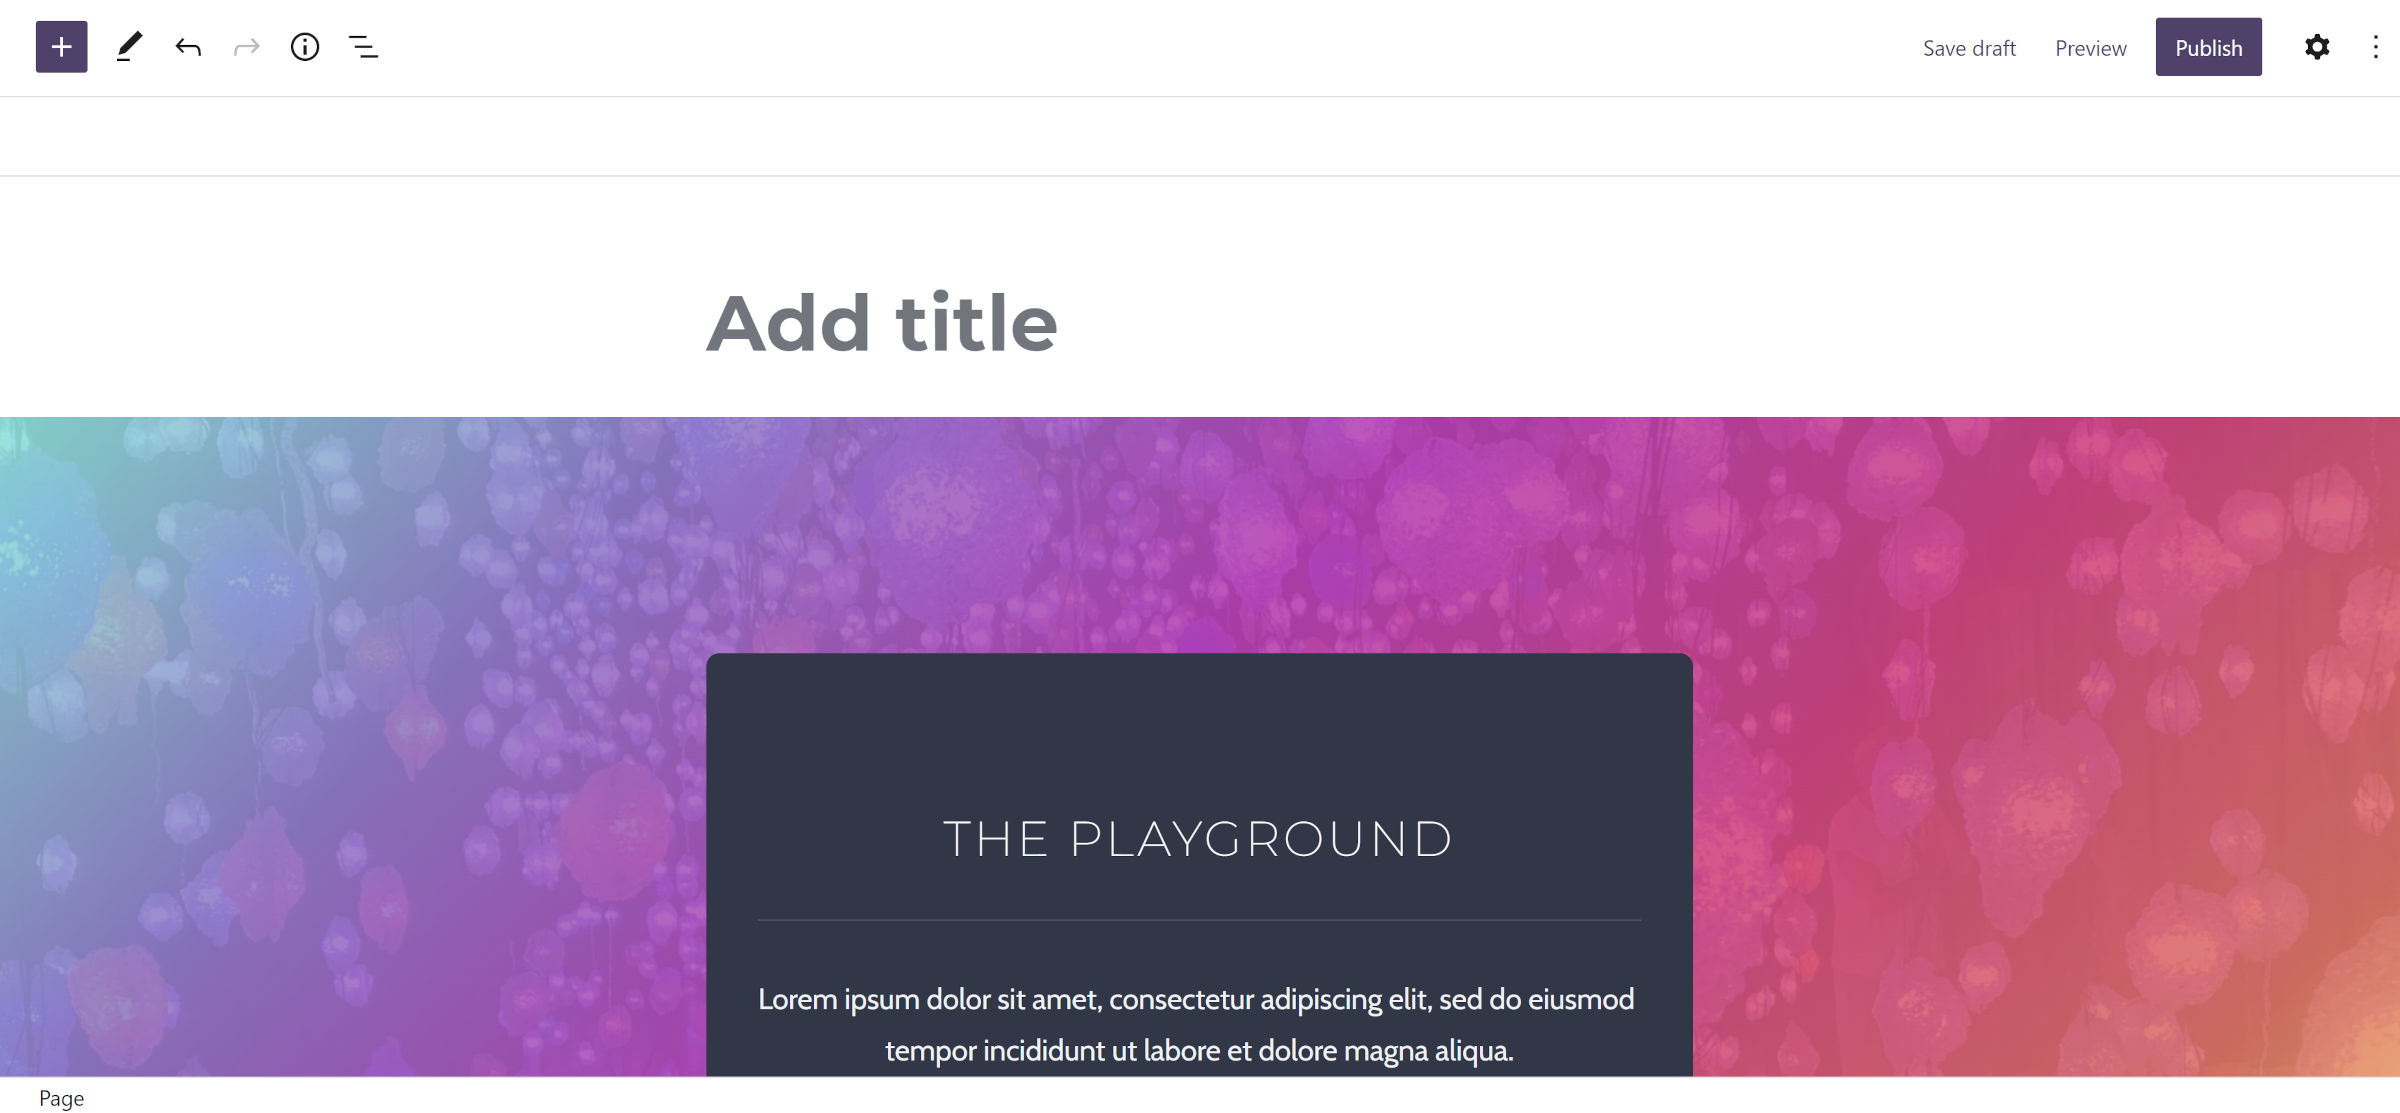 WordPress page editor with a full pattern inserted into the content canvas.  It features a colorful background and a centered section for profile content.